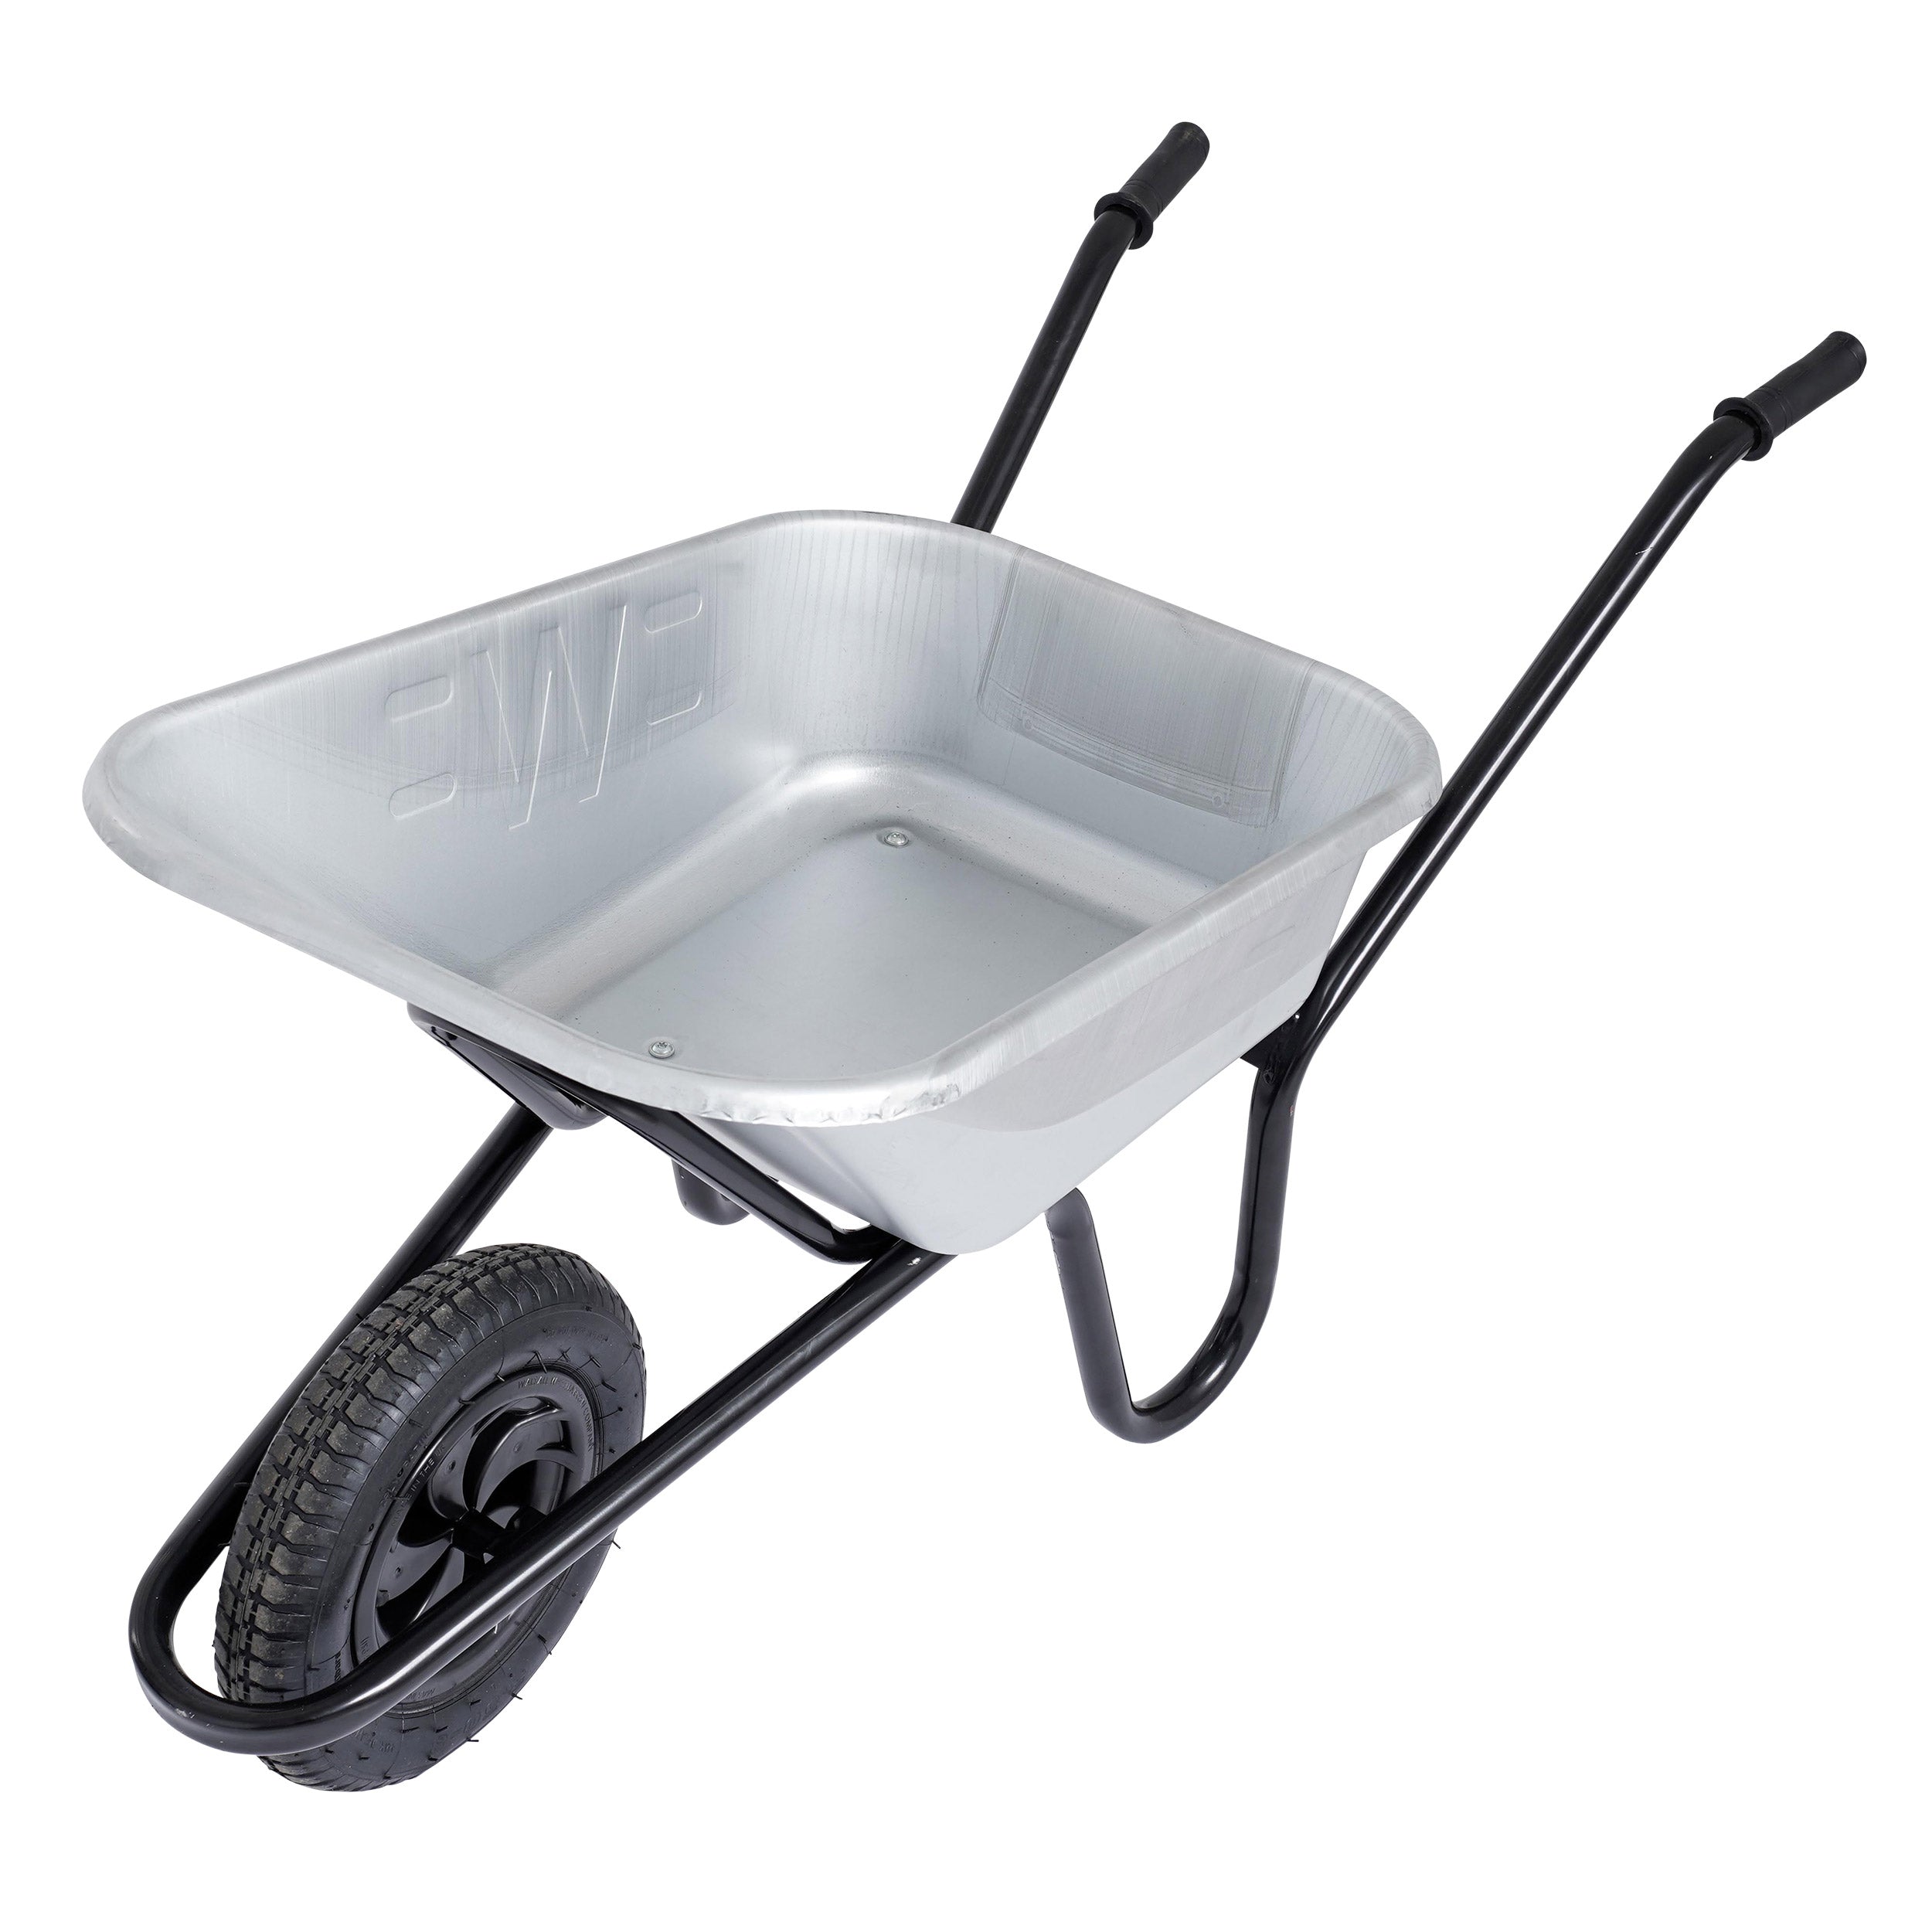 Full image of Invincible Galvanised Wheelbarrow, silver body with black tyre and frame